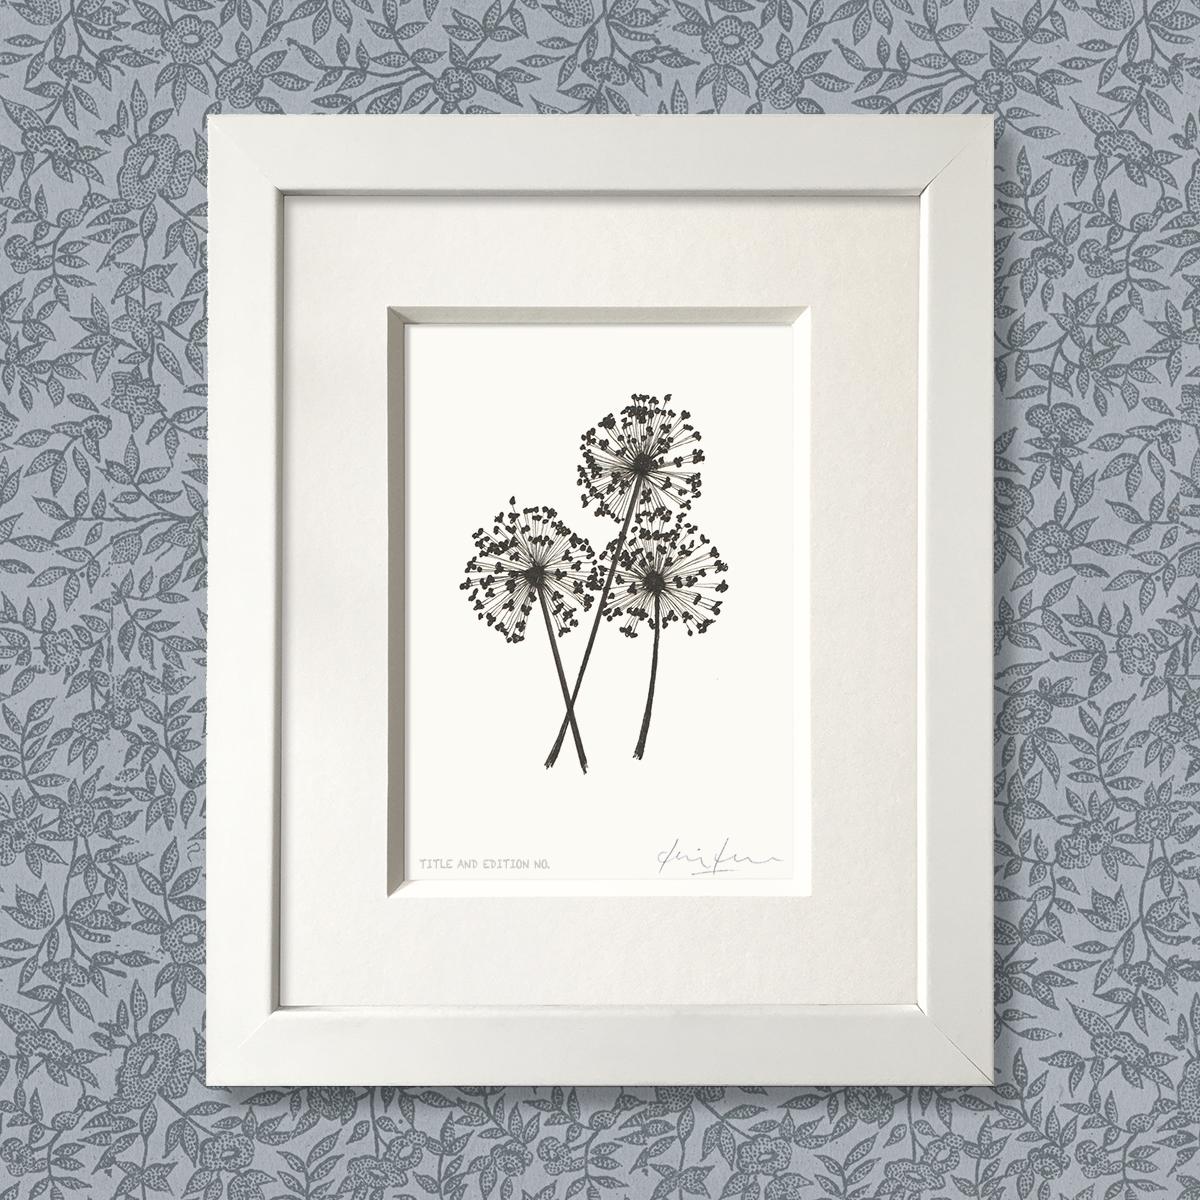 Limited edition print from pen and ink drawing of alliums in a white frame